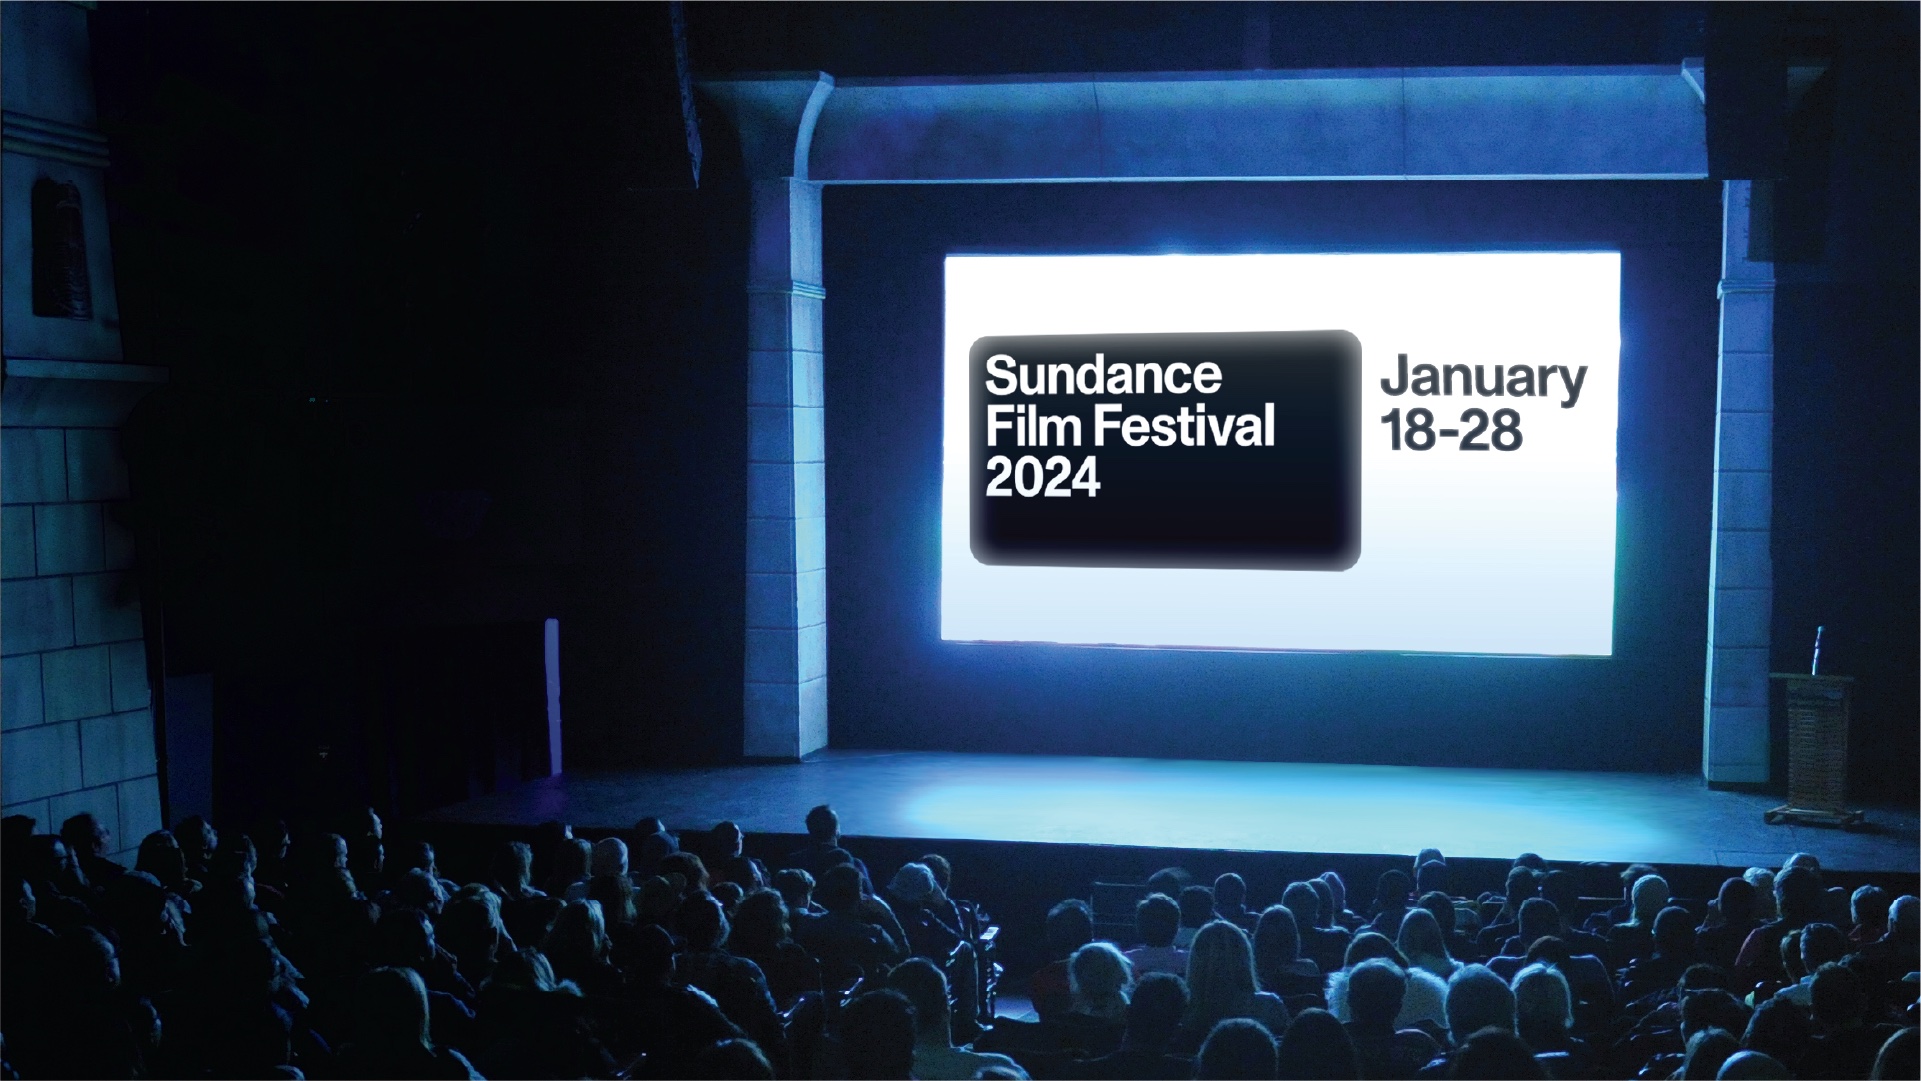 5 things we can’t wait to see at Sundance Film Festival